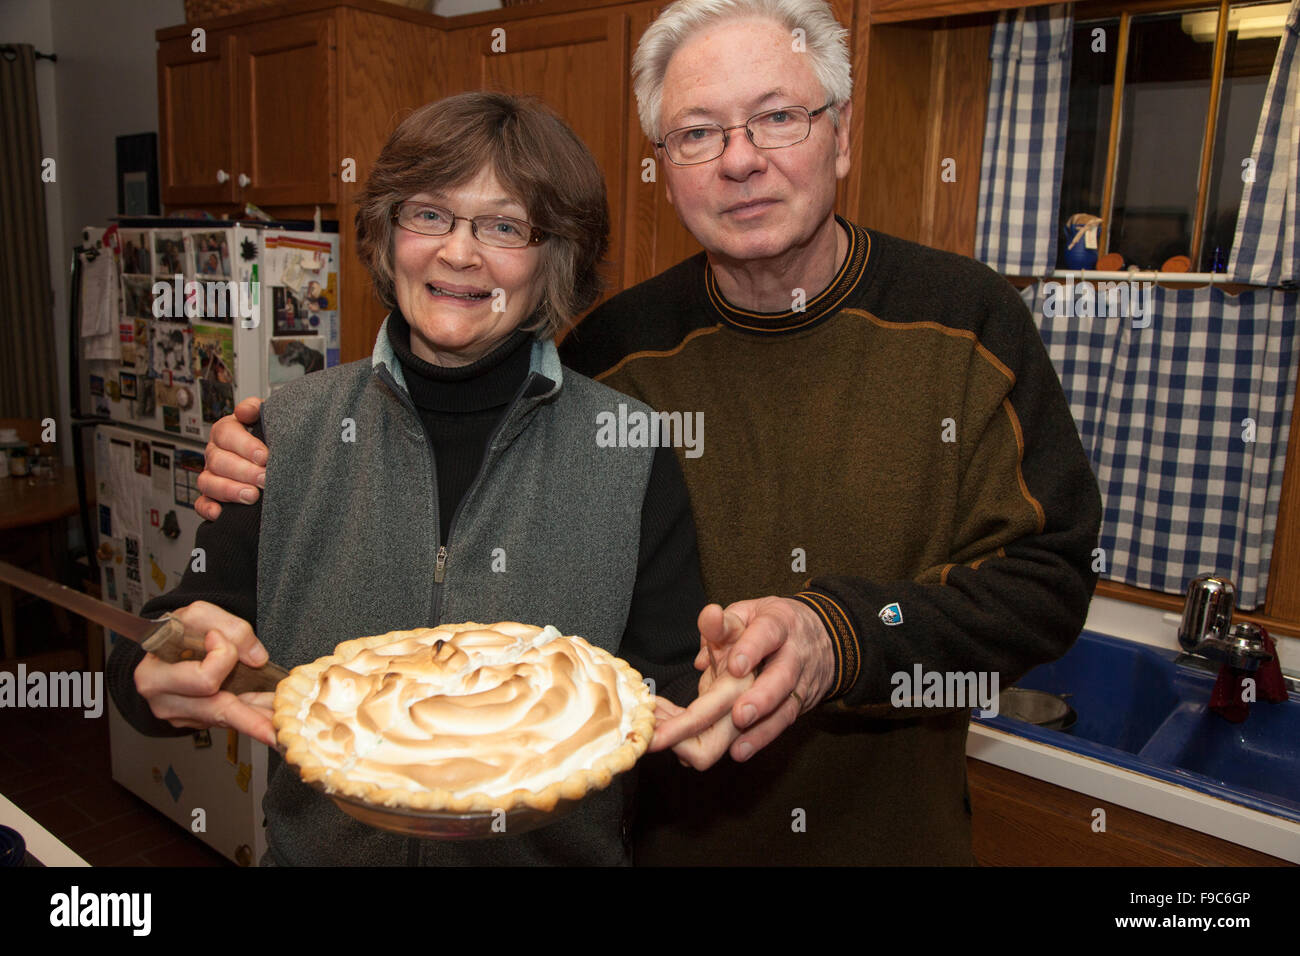 American Gothic style photo of spouses holding a meringue topped pie in their kitchen. St Paul Minnesota MN USA Stock Photo